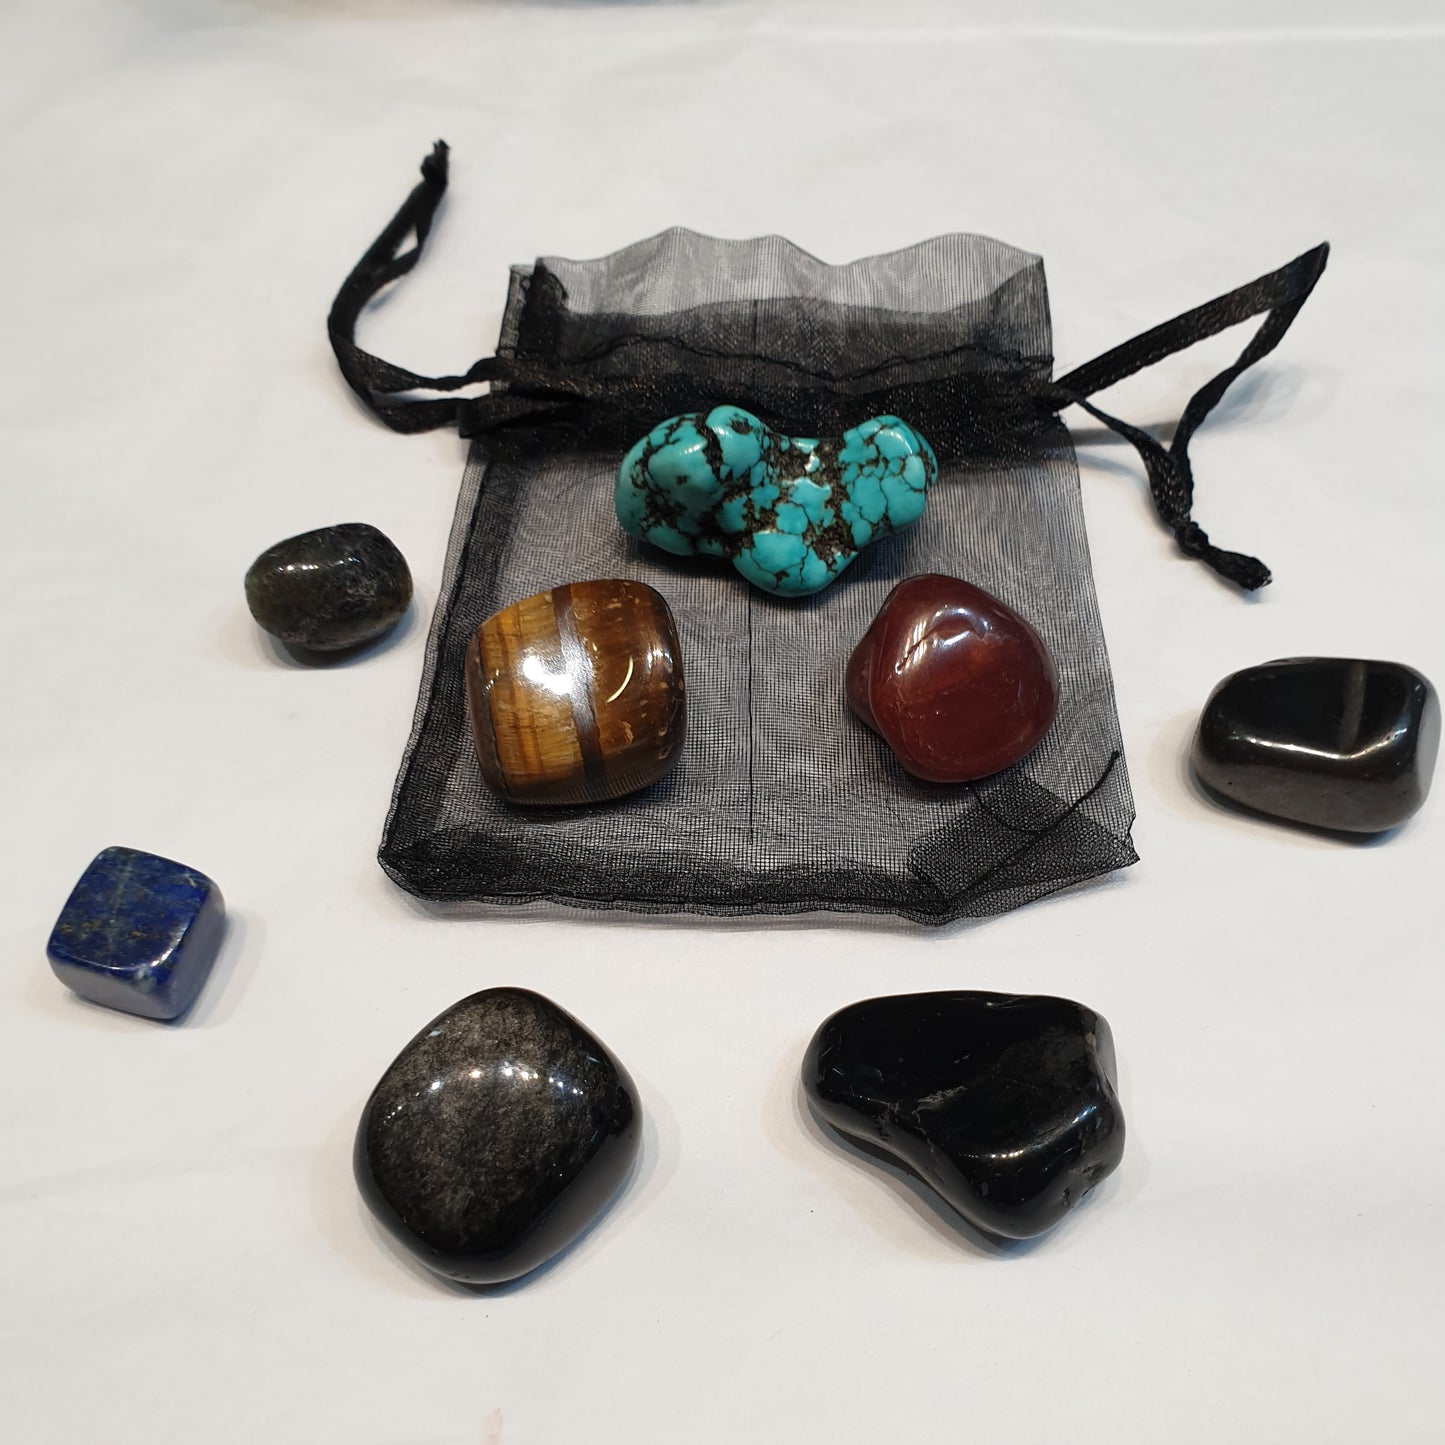 Stones For Protection - Rivendell Shop